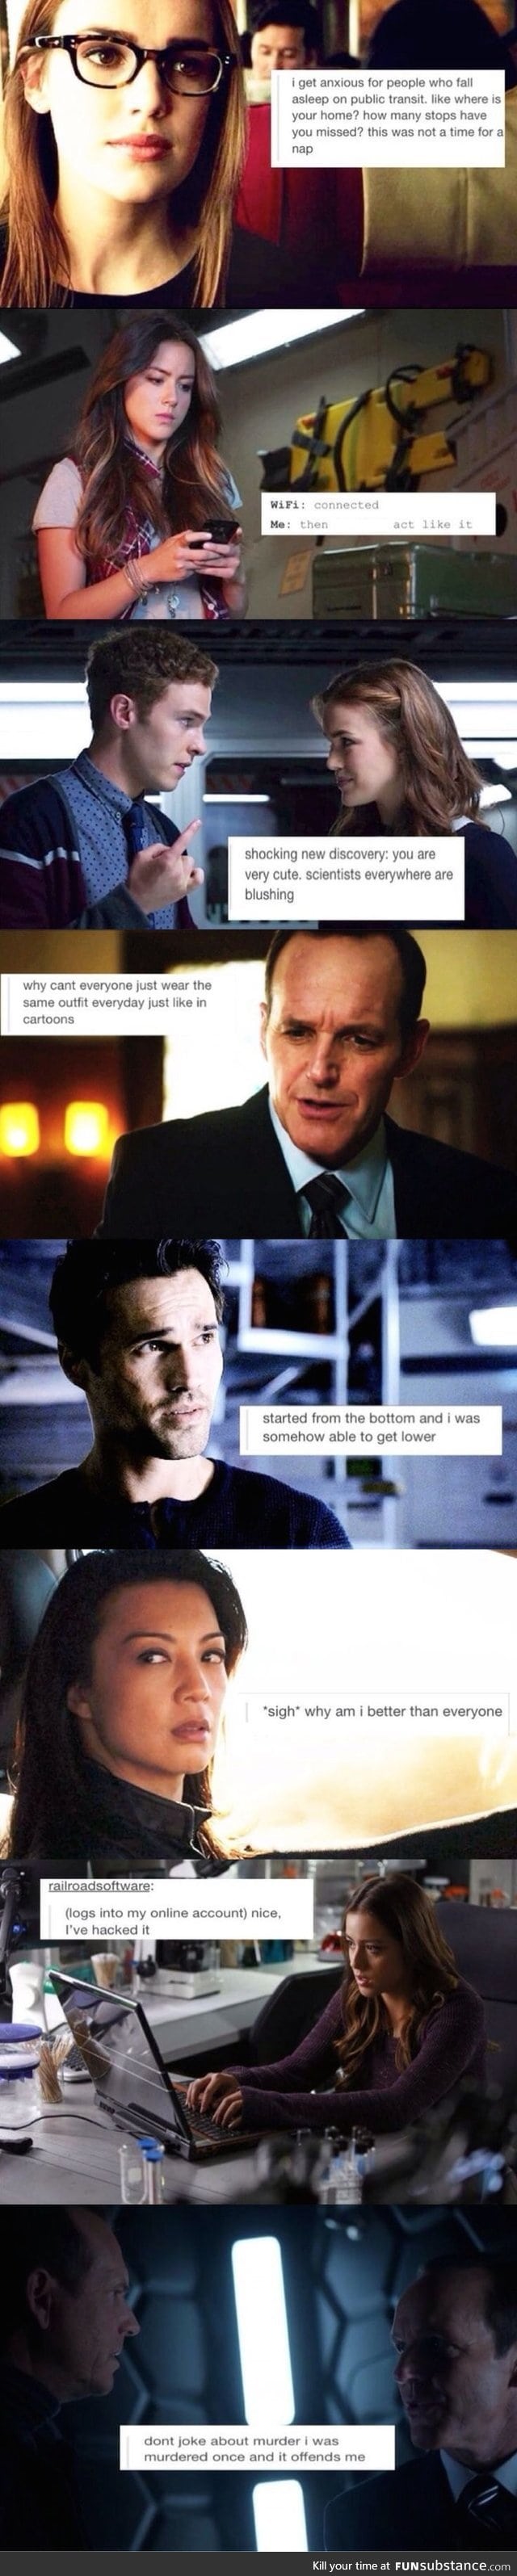 Agents of Shield tumblr comp